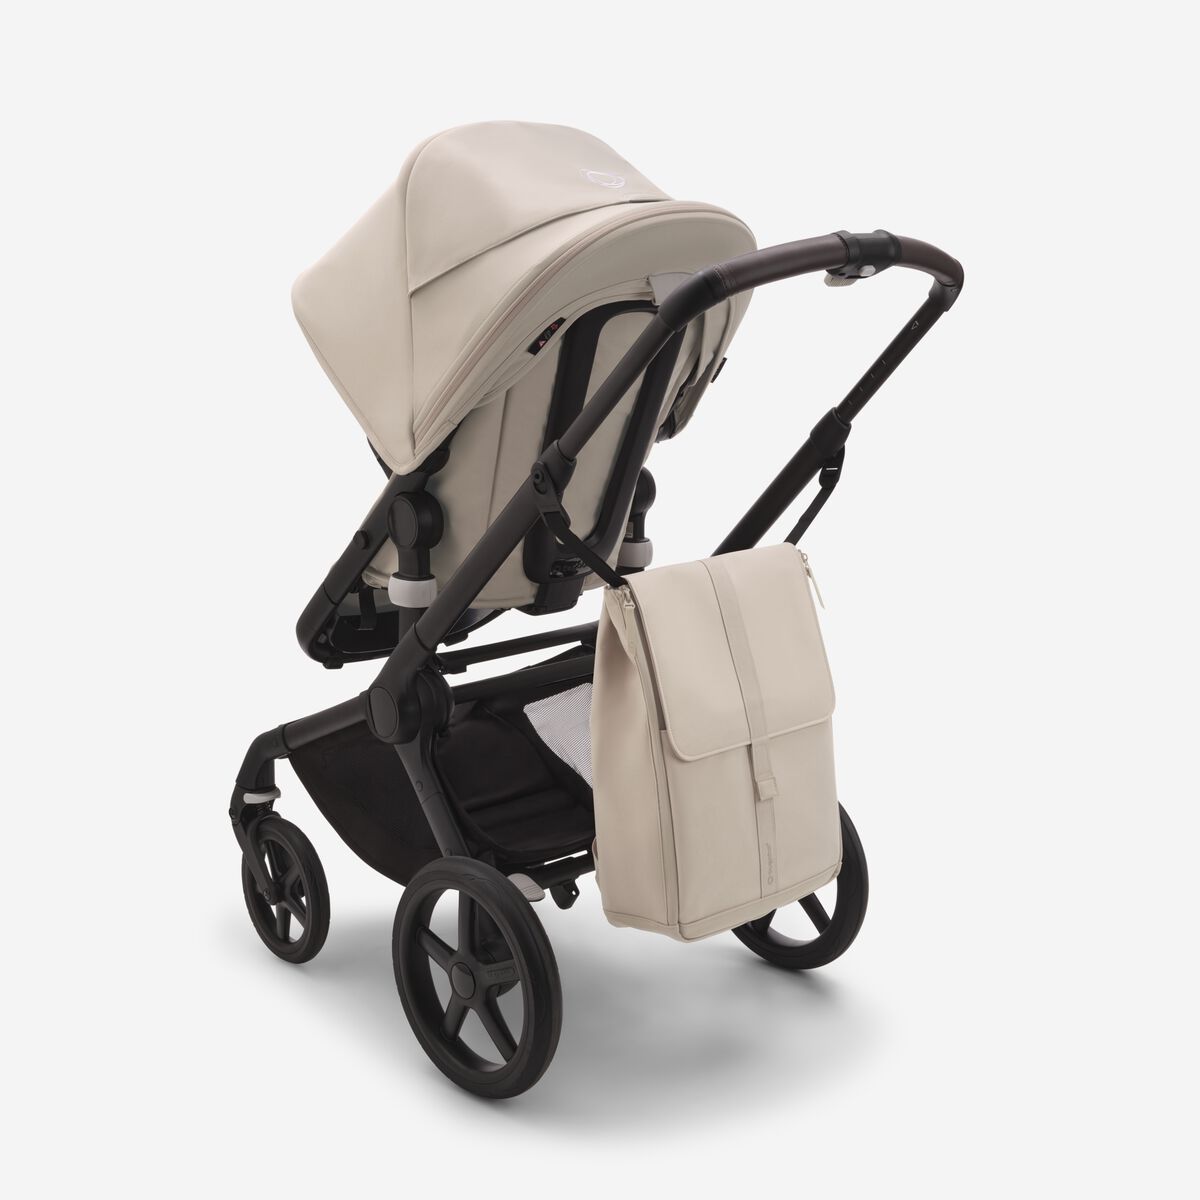 Bugaboo Changing Backpack - ANB Baby -8717447254904$100 - $300